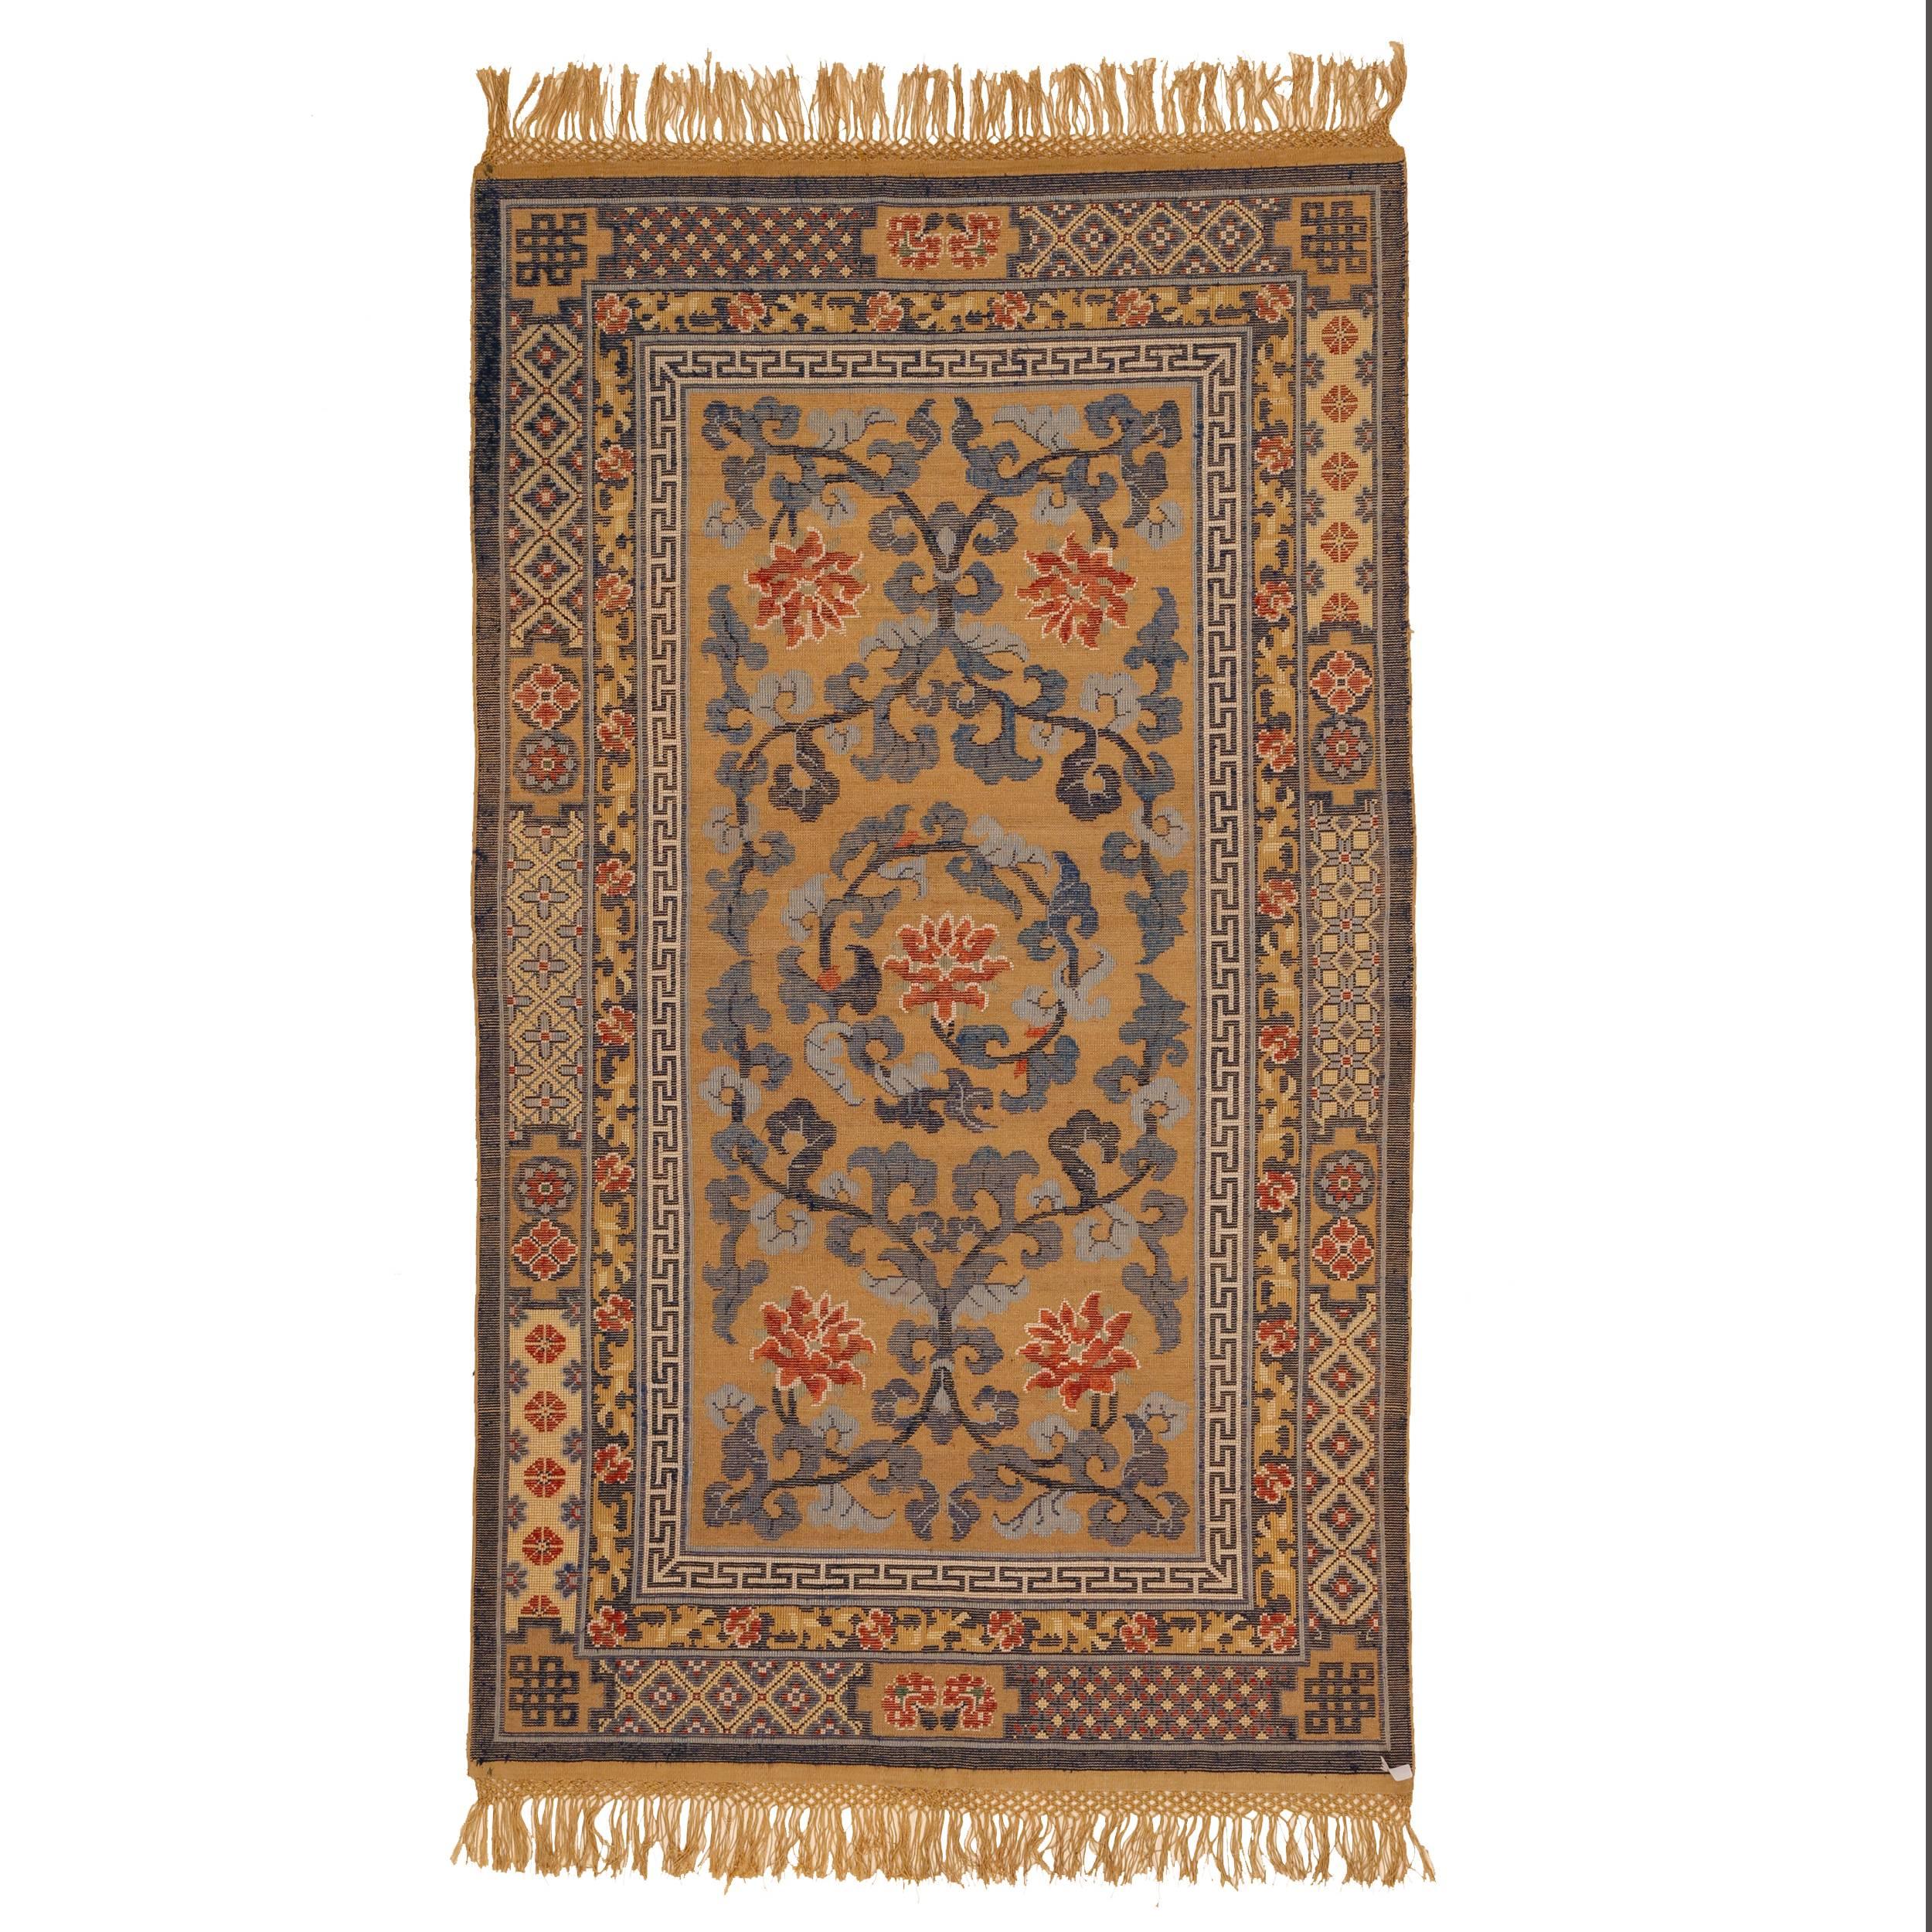 A very finely woven rug in silk and metal thread distinguished by a pattern of swirling leafy stems from which sprout large lotus flowers (symbols of purity. The silk pile is embossed, meaning that its pile is raised relative to the metallic-thread